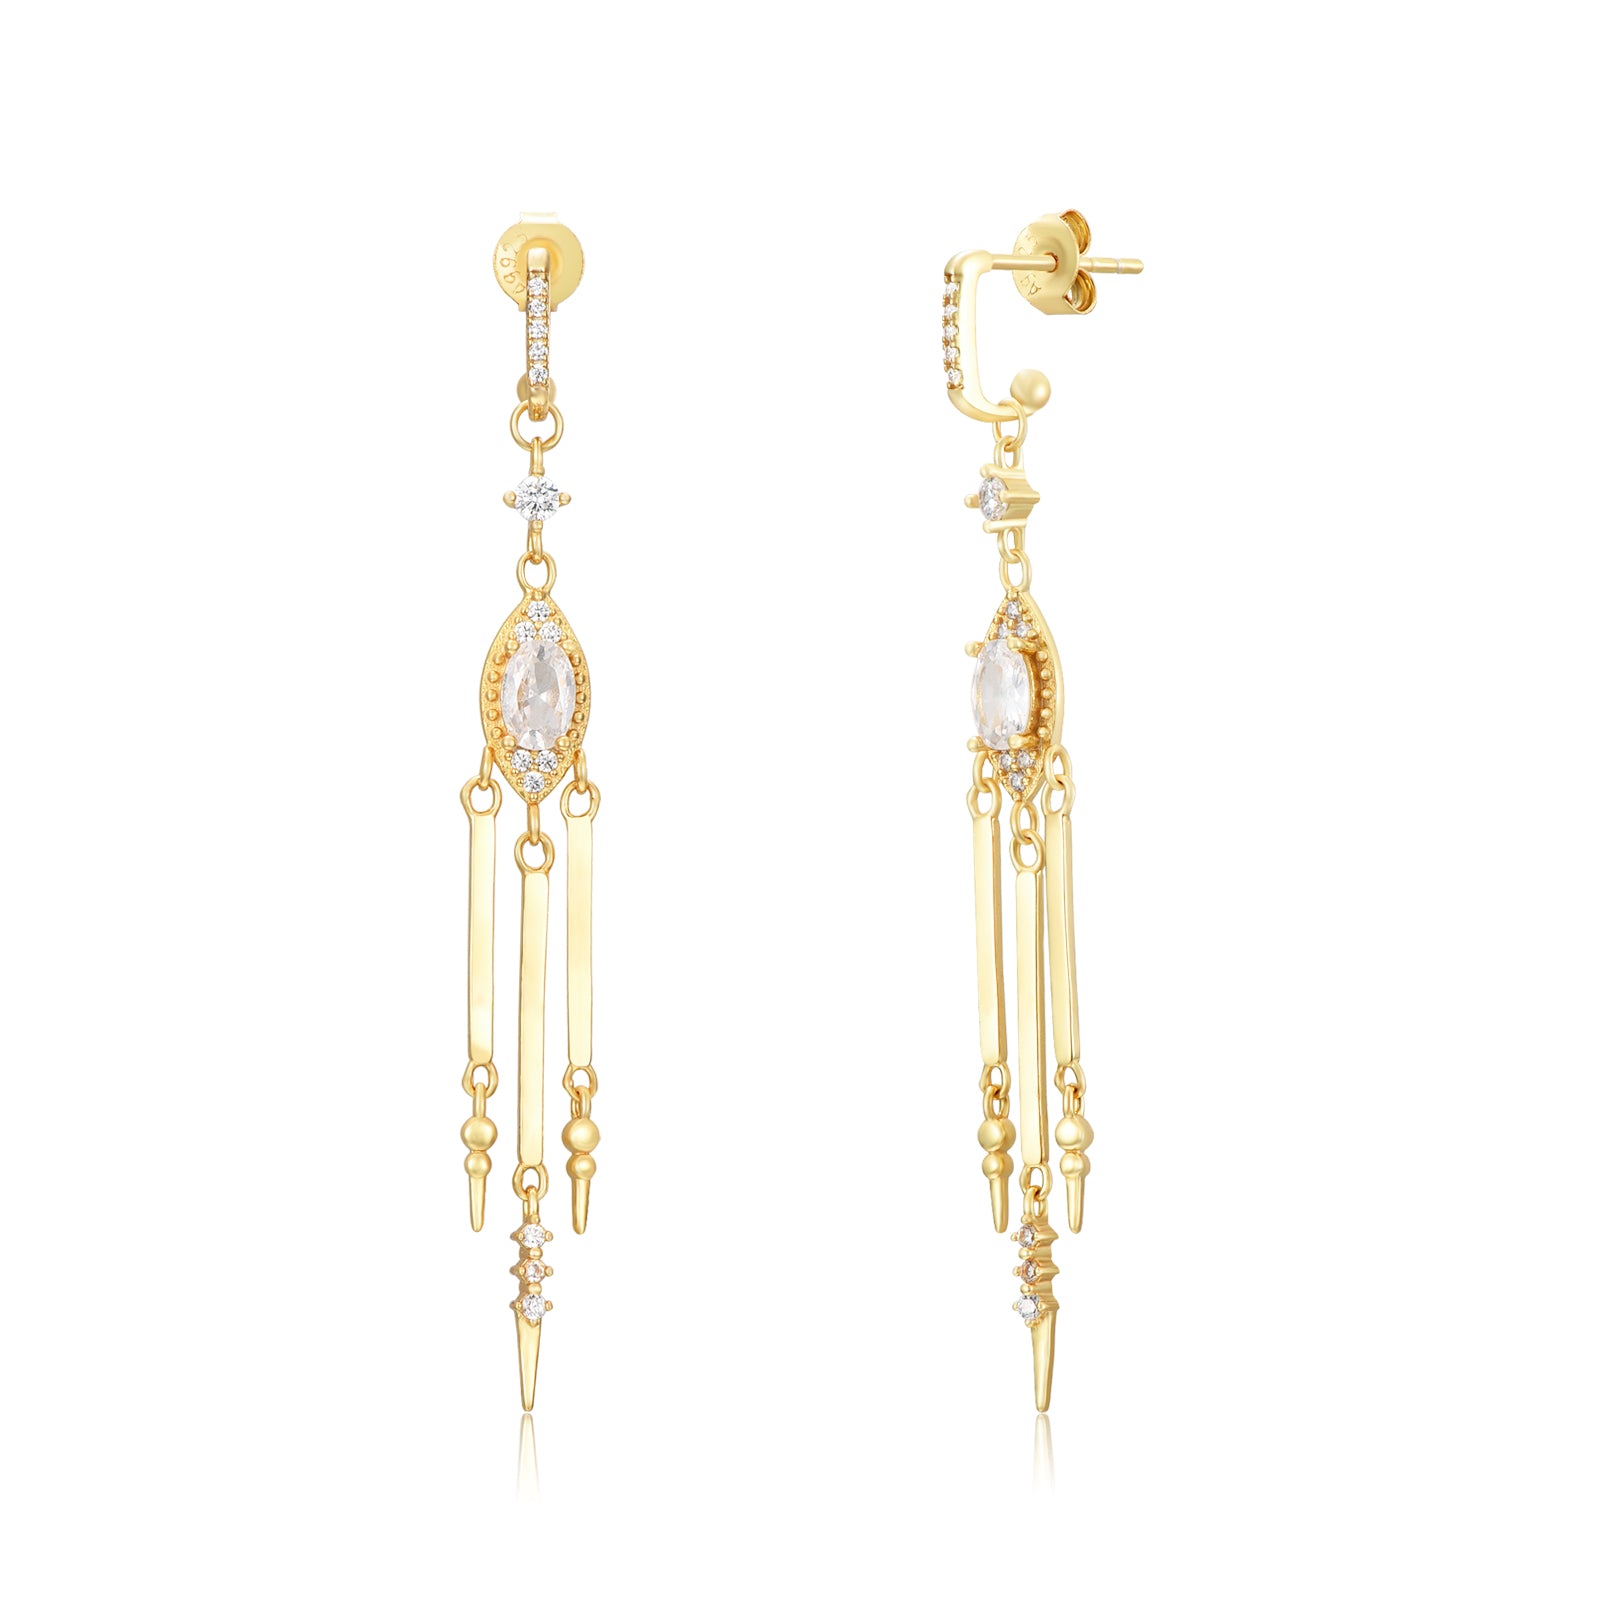 Buy Accessories Tank Sui Dhaga Earrings For Women And Girls at Amazon.in